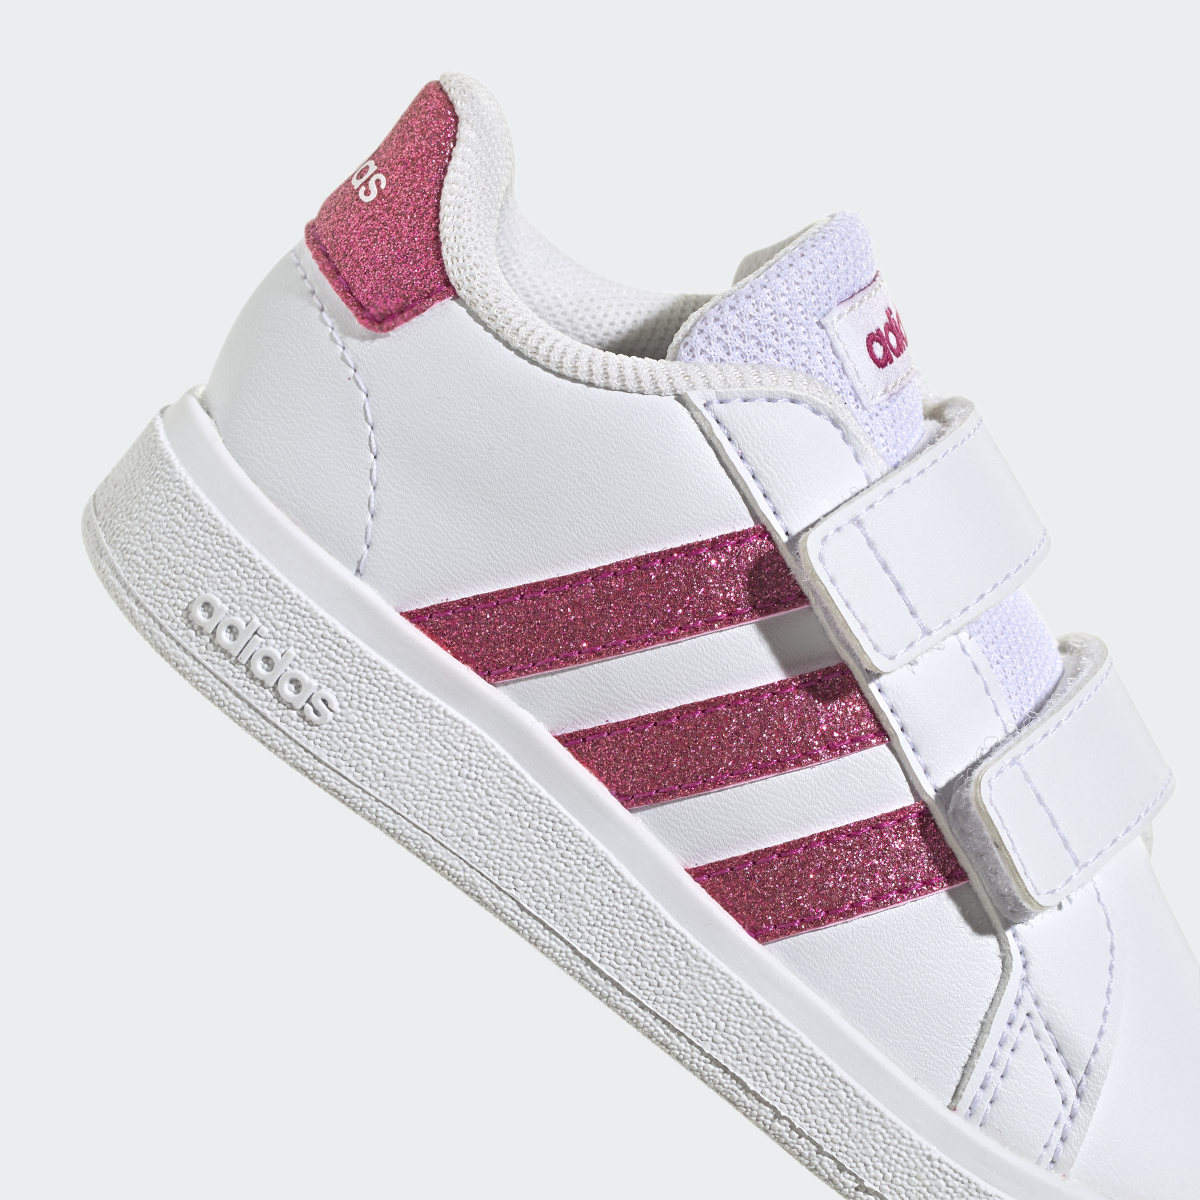 Adidas Grand Court Lifestyle Hook and Loop Shoes. 8